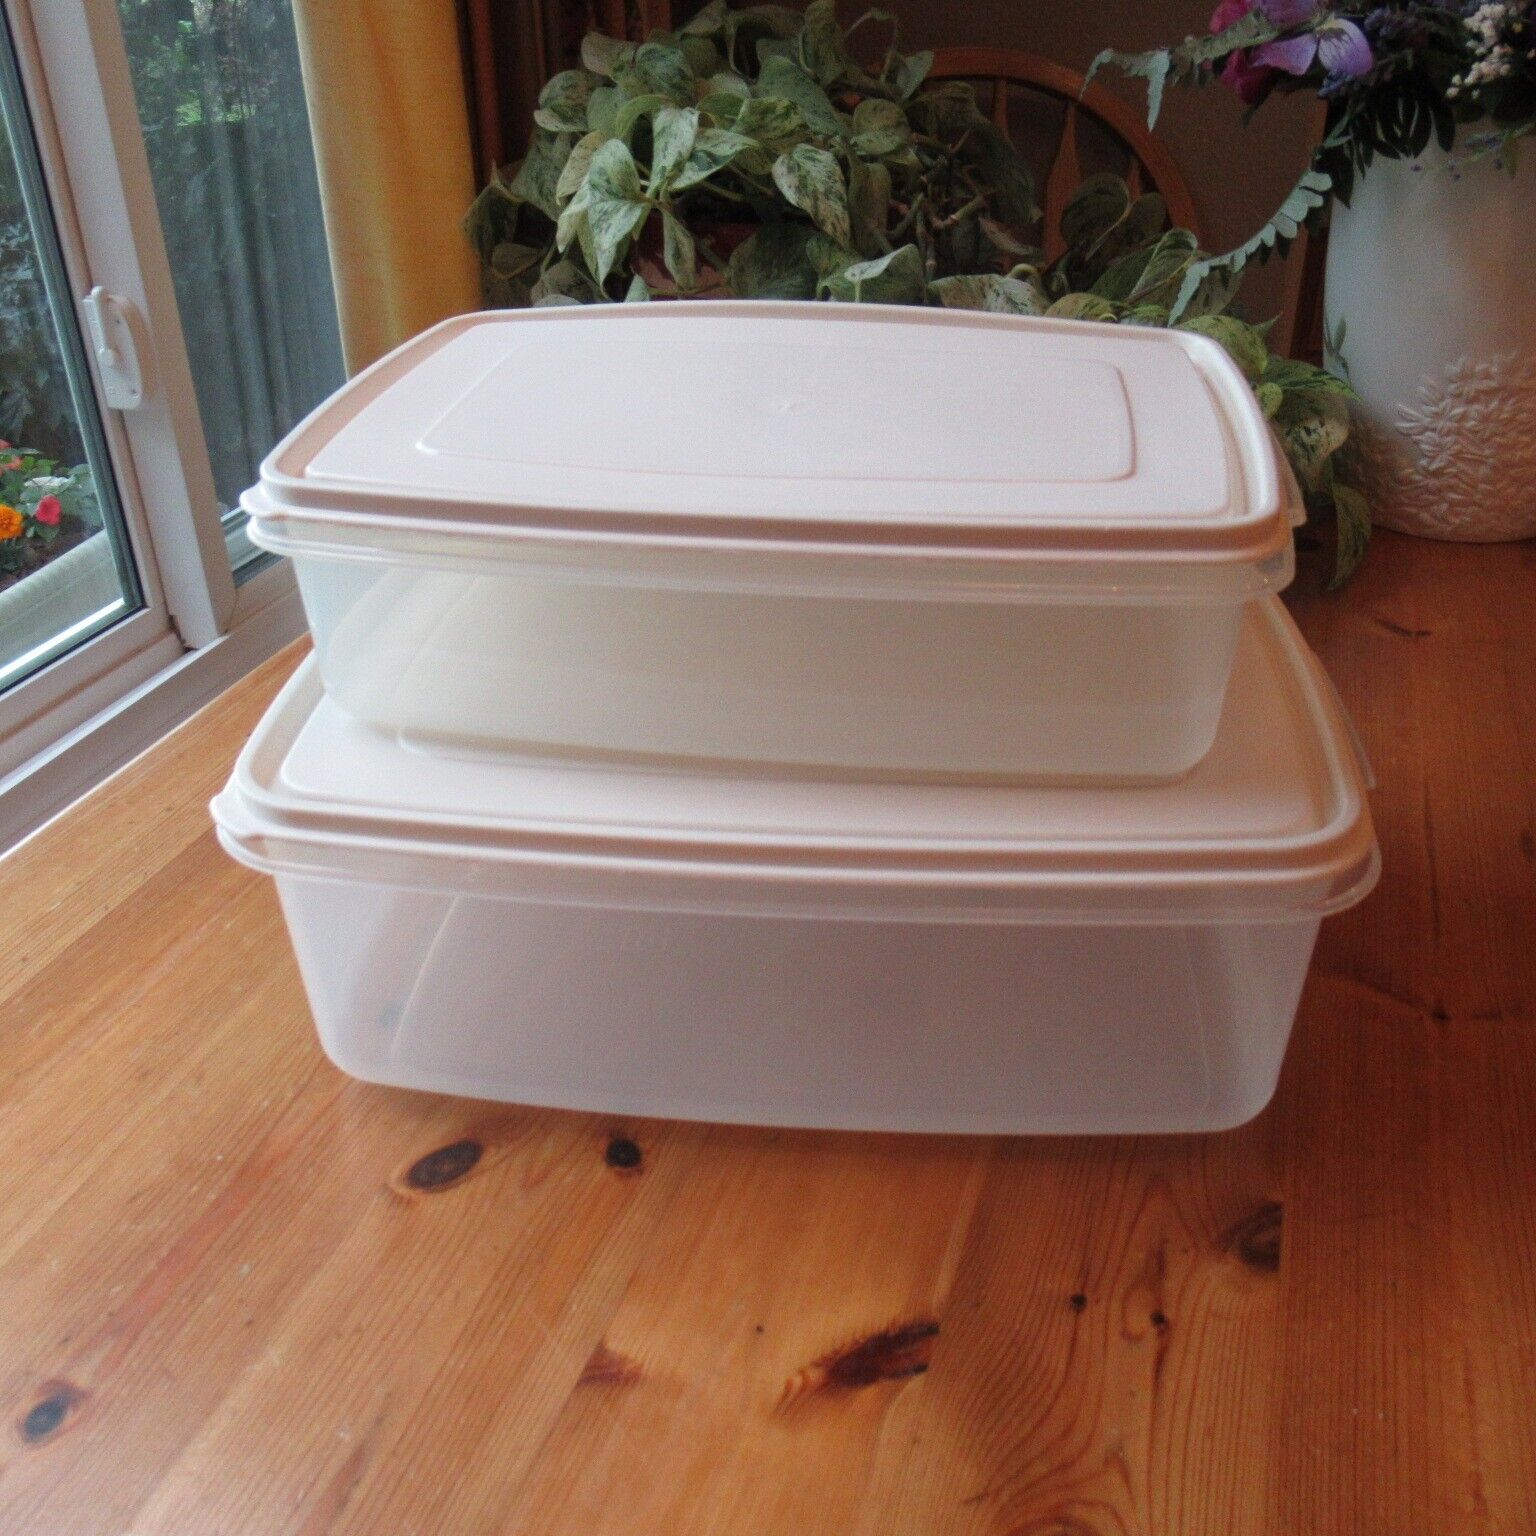 Lot of 2 Rubbermaid Servin Saver #8 #7 33 C 17 C Container Almond Lid Rectangle